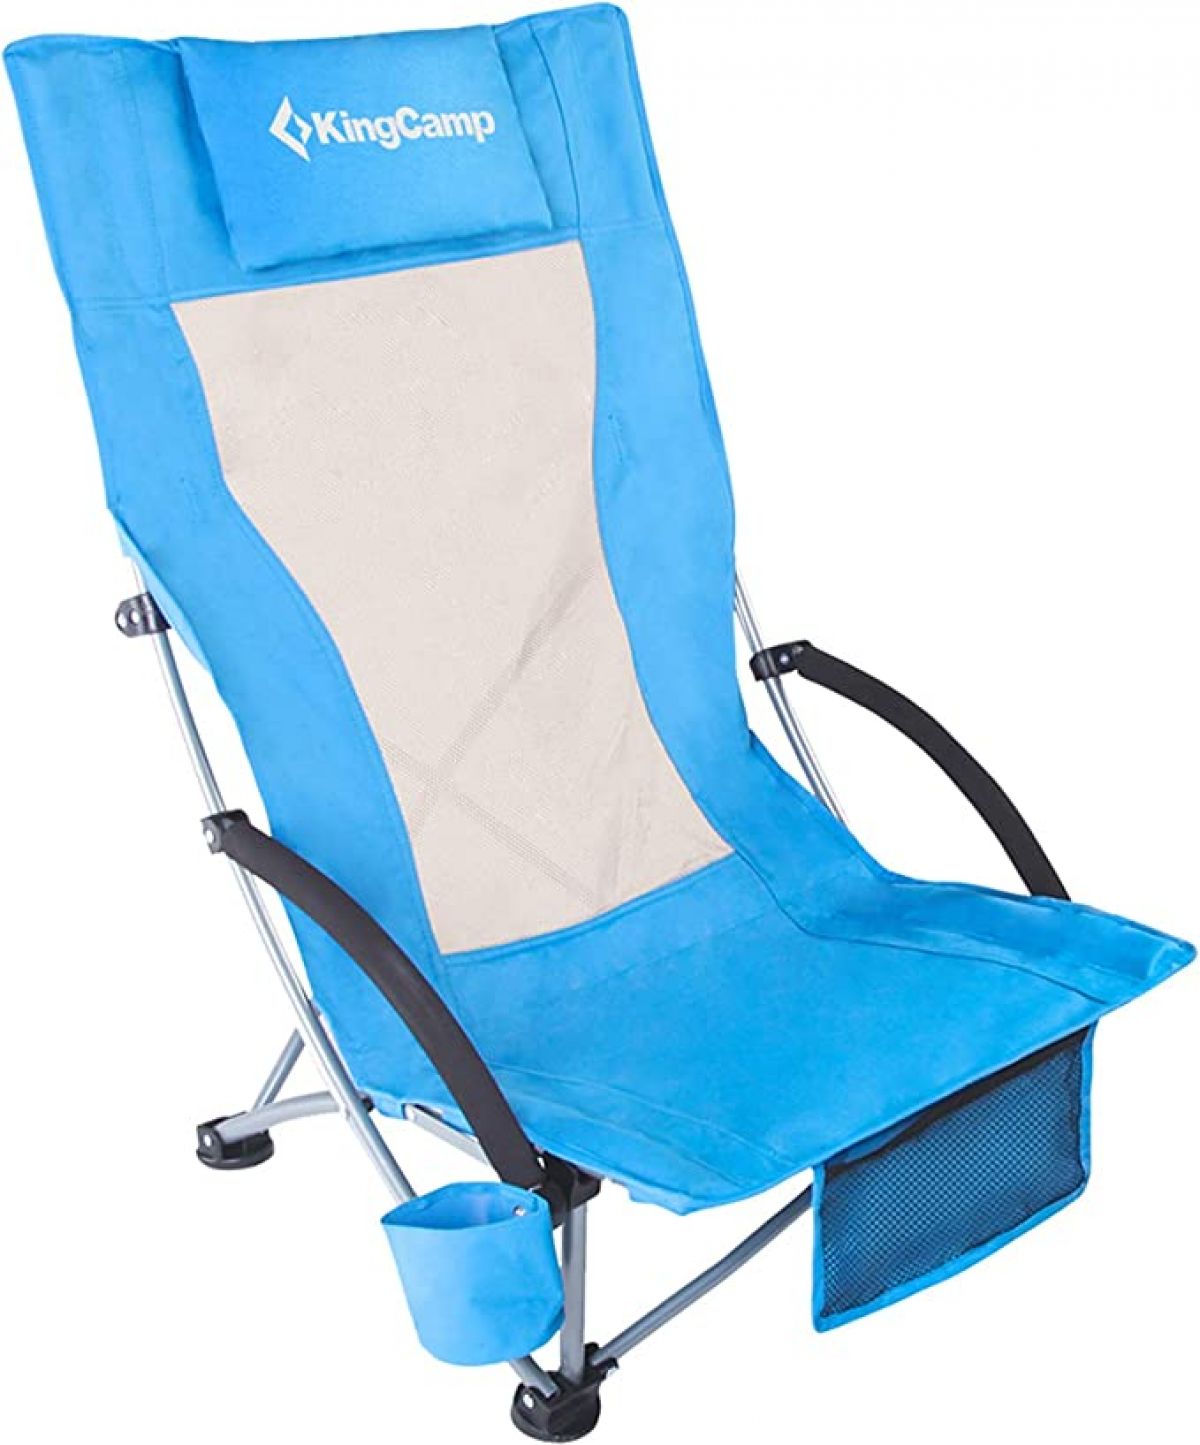 Folding camping chair KingCamp, low